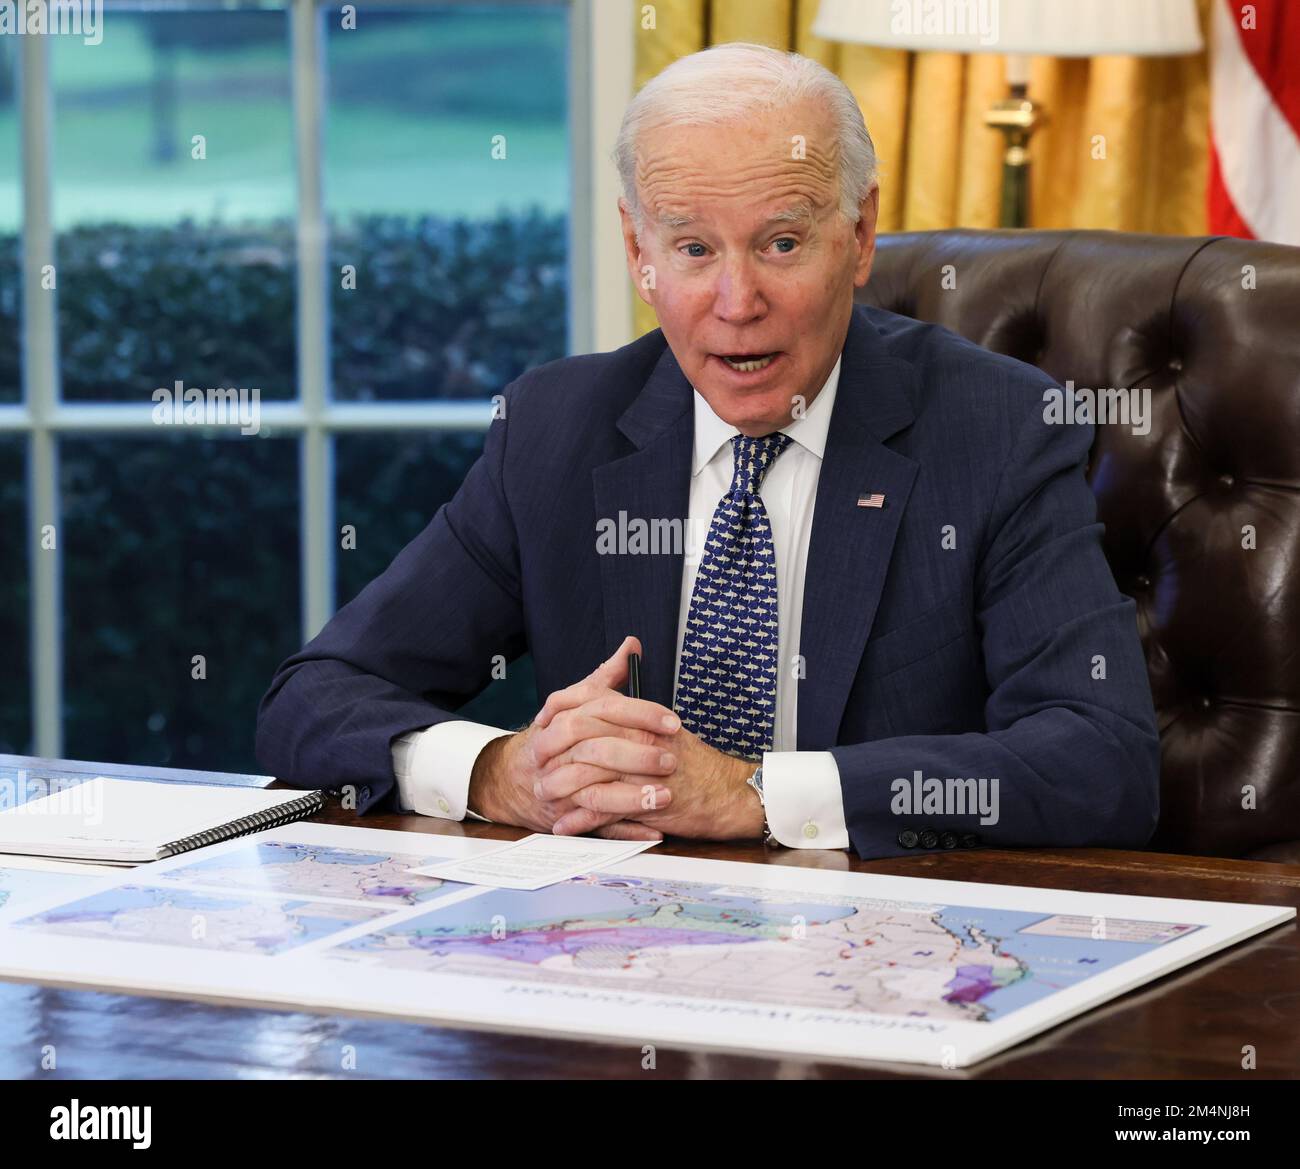 Washington, DC, United States. 22nd Dec, 2022. President Joe Biden issues warnings and travel advisories from the White House for the United States as a severe weather system threatens to impact most of the country on Thursday December 22, 2022 in Washington, DC. The weather system which is being called a 'Bomb Cyclone' threatens to disrupt travel and create life threatening conditions for large parts of the country over the December 25th Christmas Weekend. Photo by Jemal Countess/UPI Credit: UPI/Alamy Live News Stock Photo